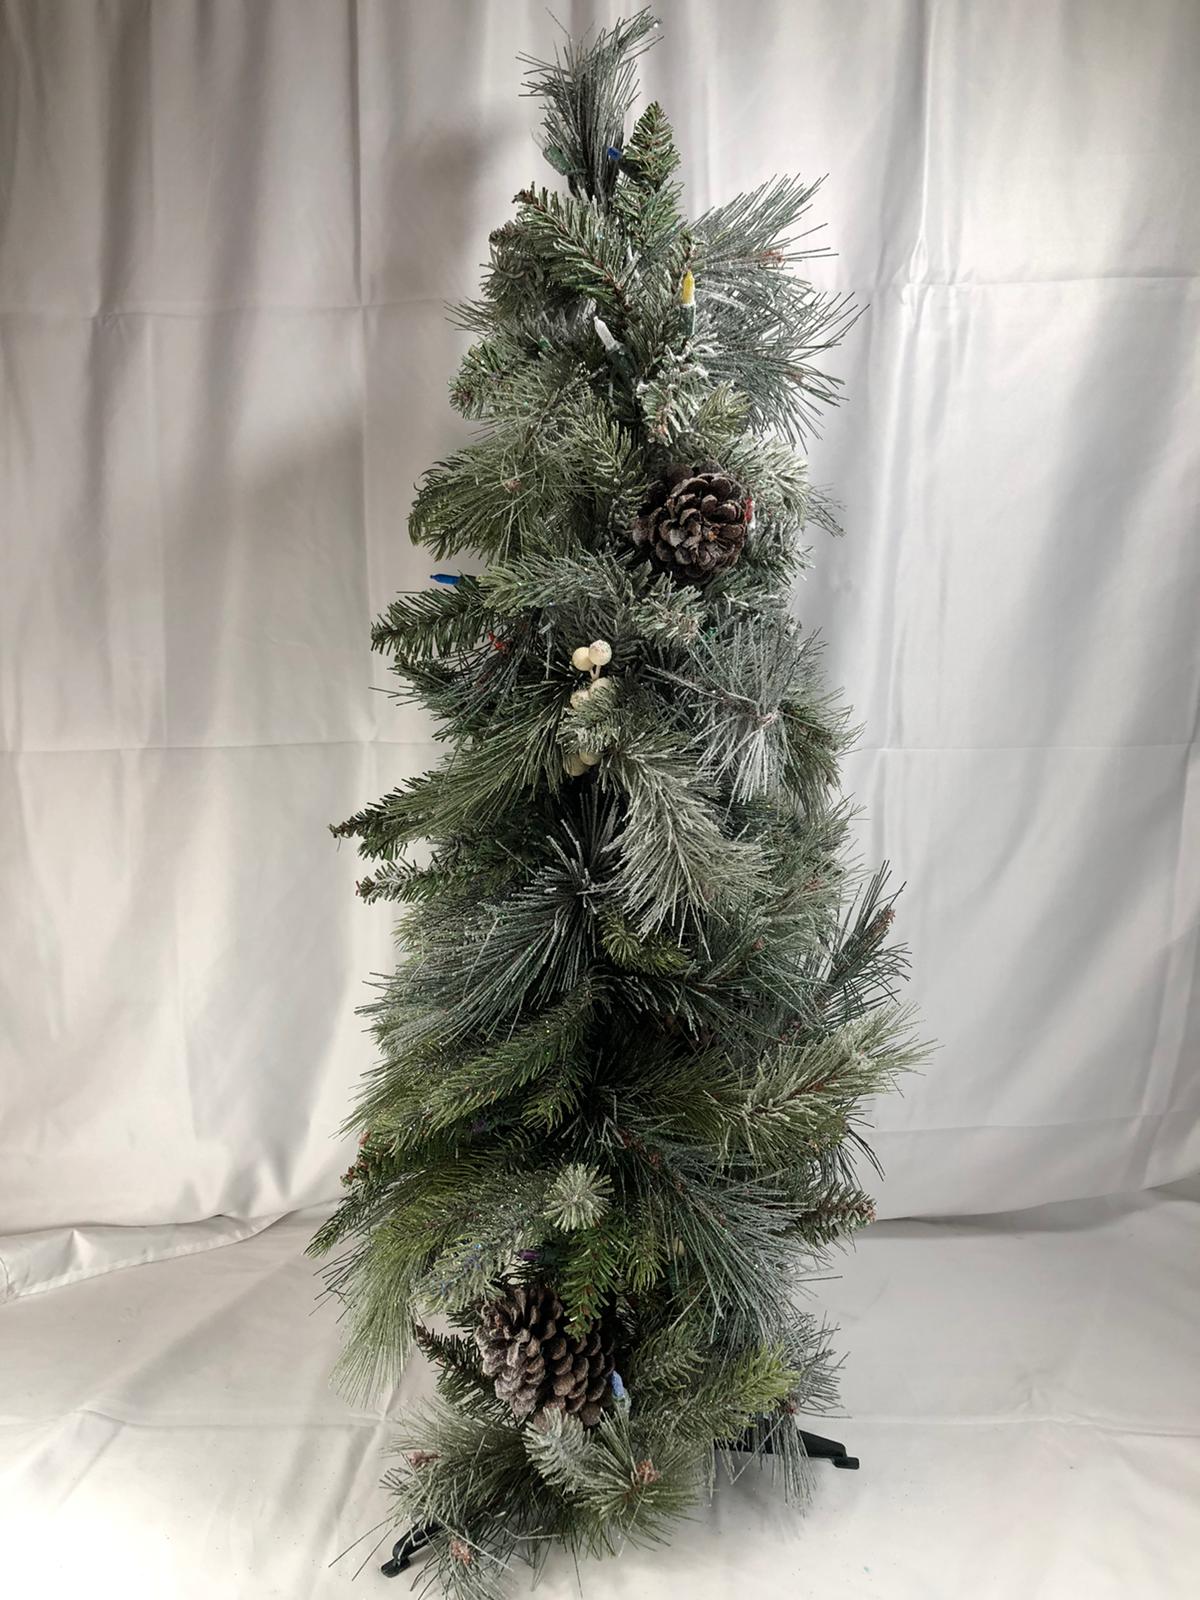 3' Twinkling Frosted Pine and Berry Tree by Valerie